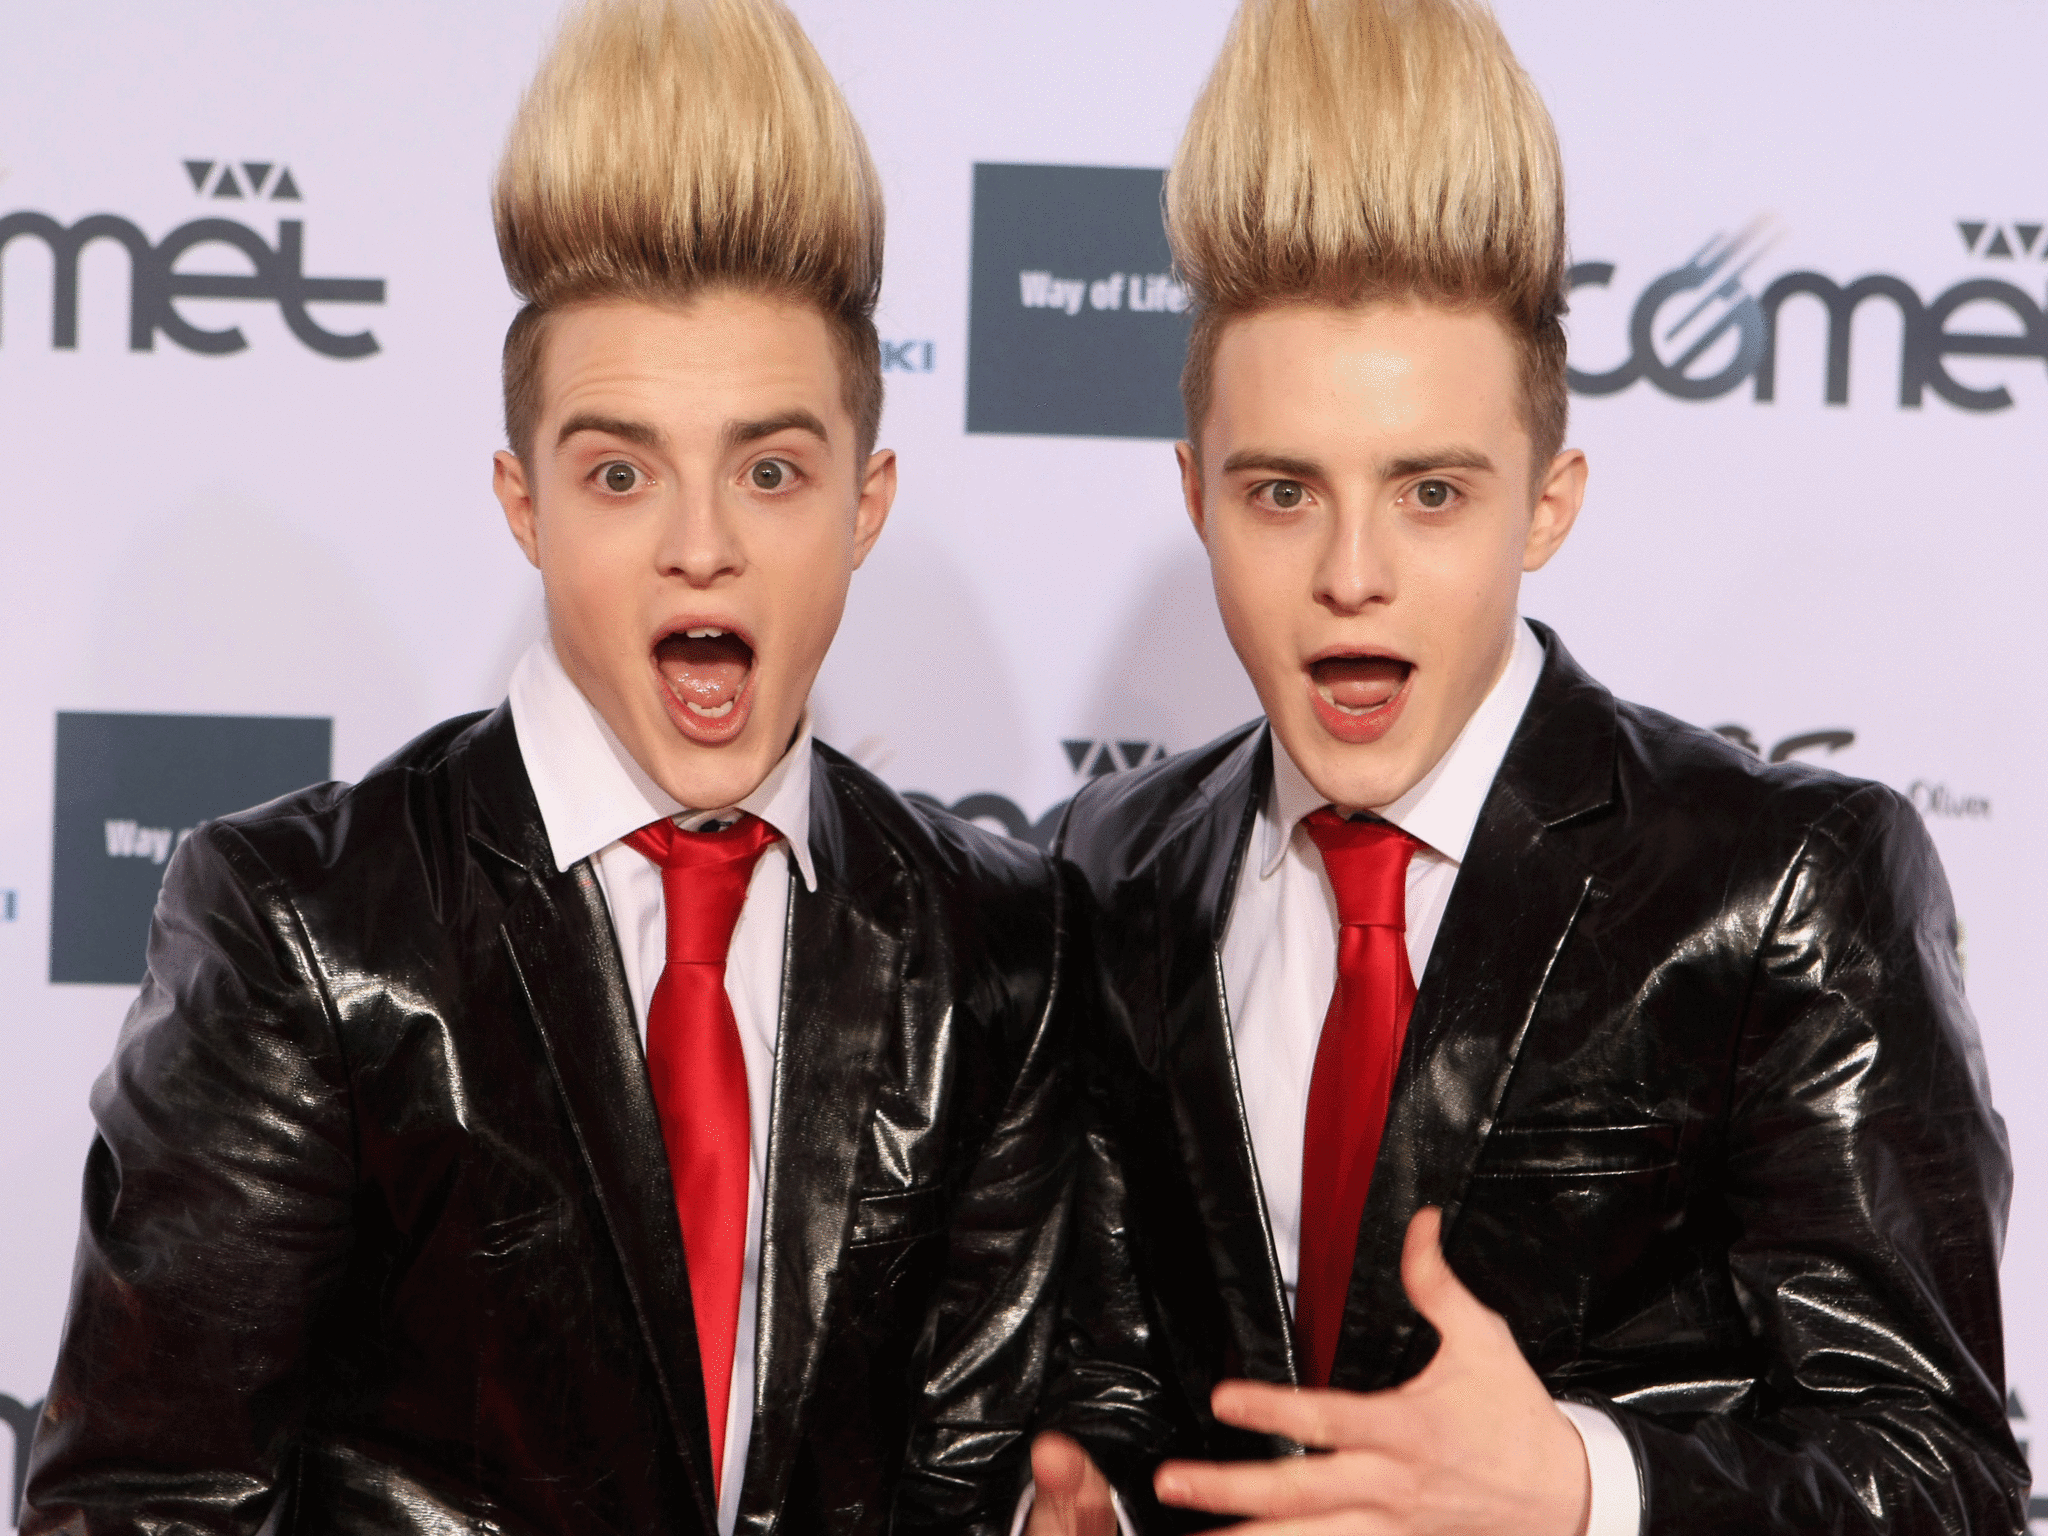 John and Edward Grimes, also known as Jedward, were not involved in the shoplifting incident